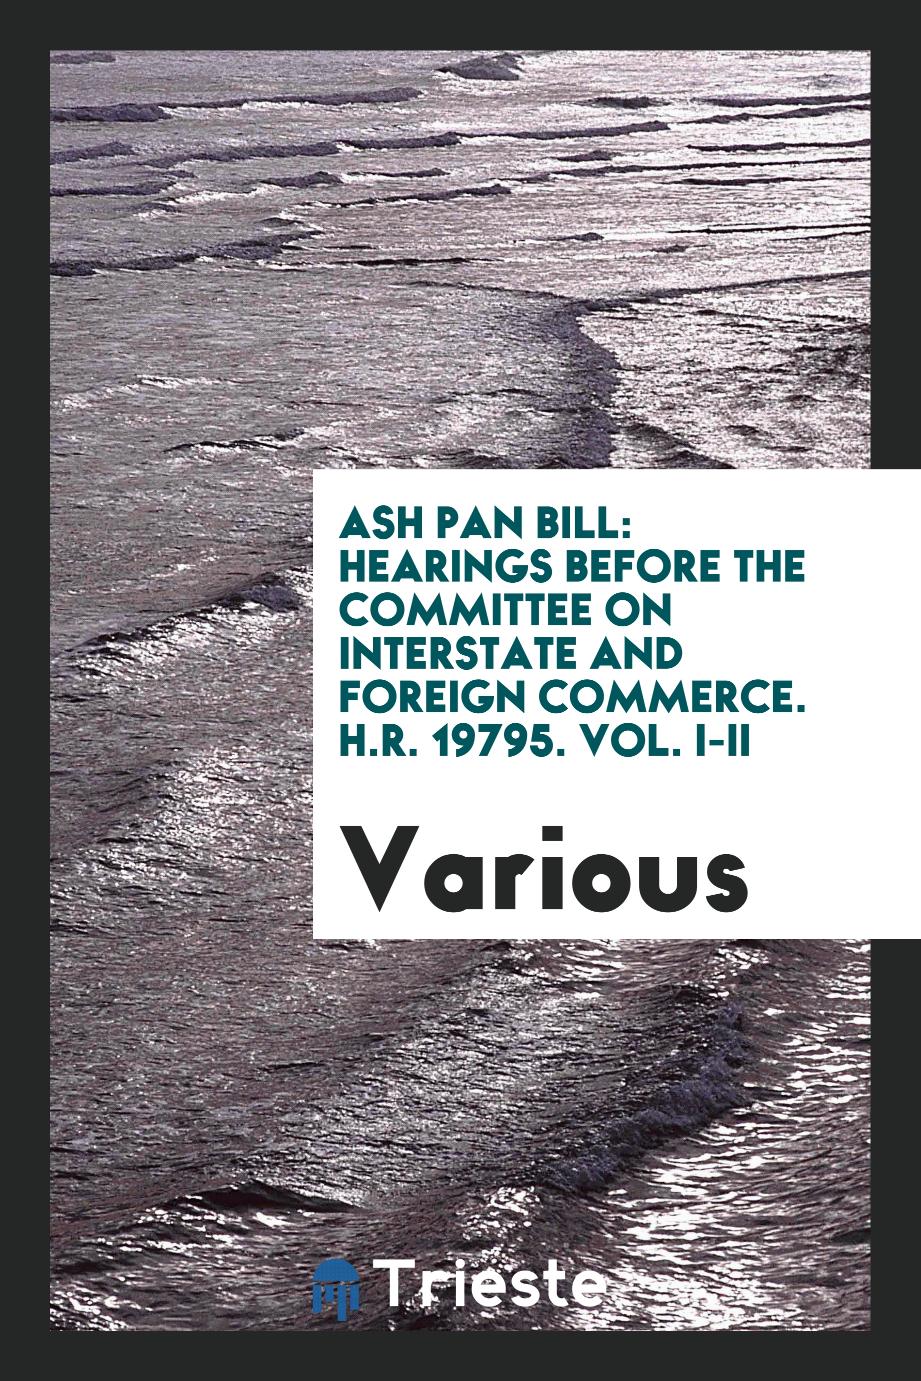 Ash Pan Bill: Hearings before the committee on interstate and foreign commerce. H.R. 19795. Vol. I-II